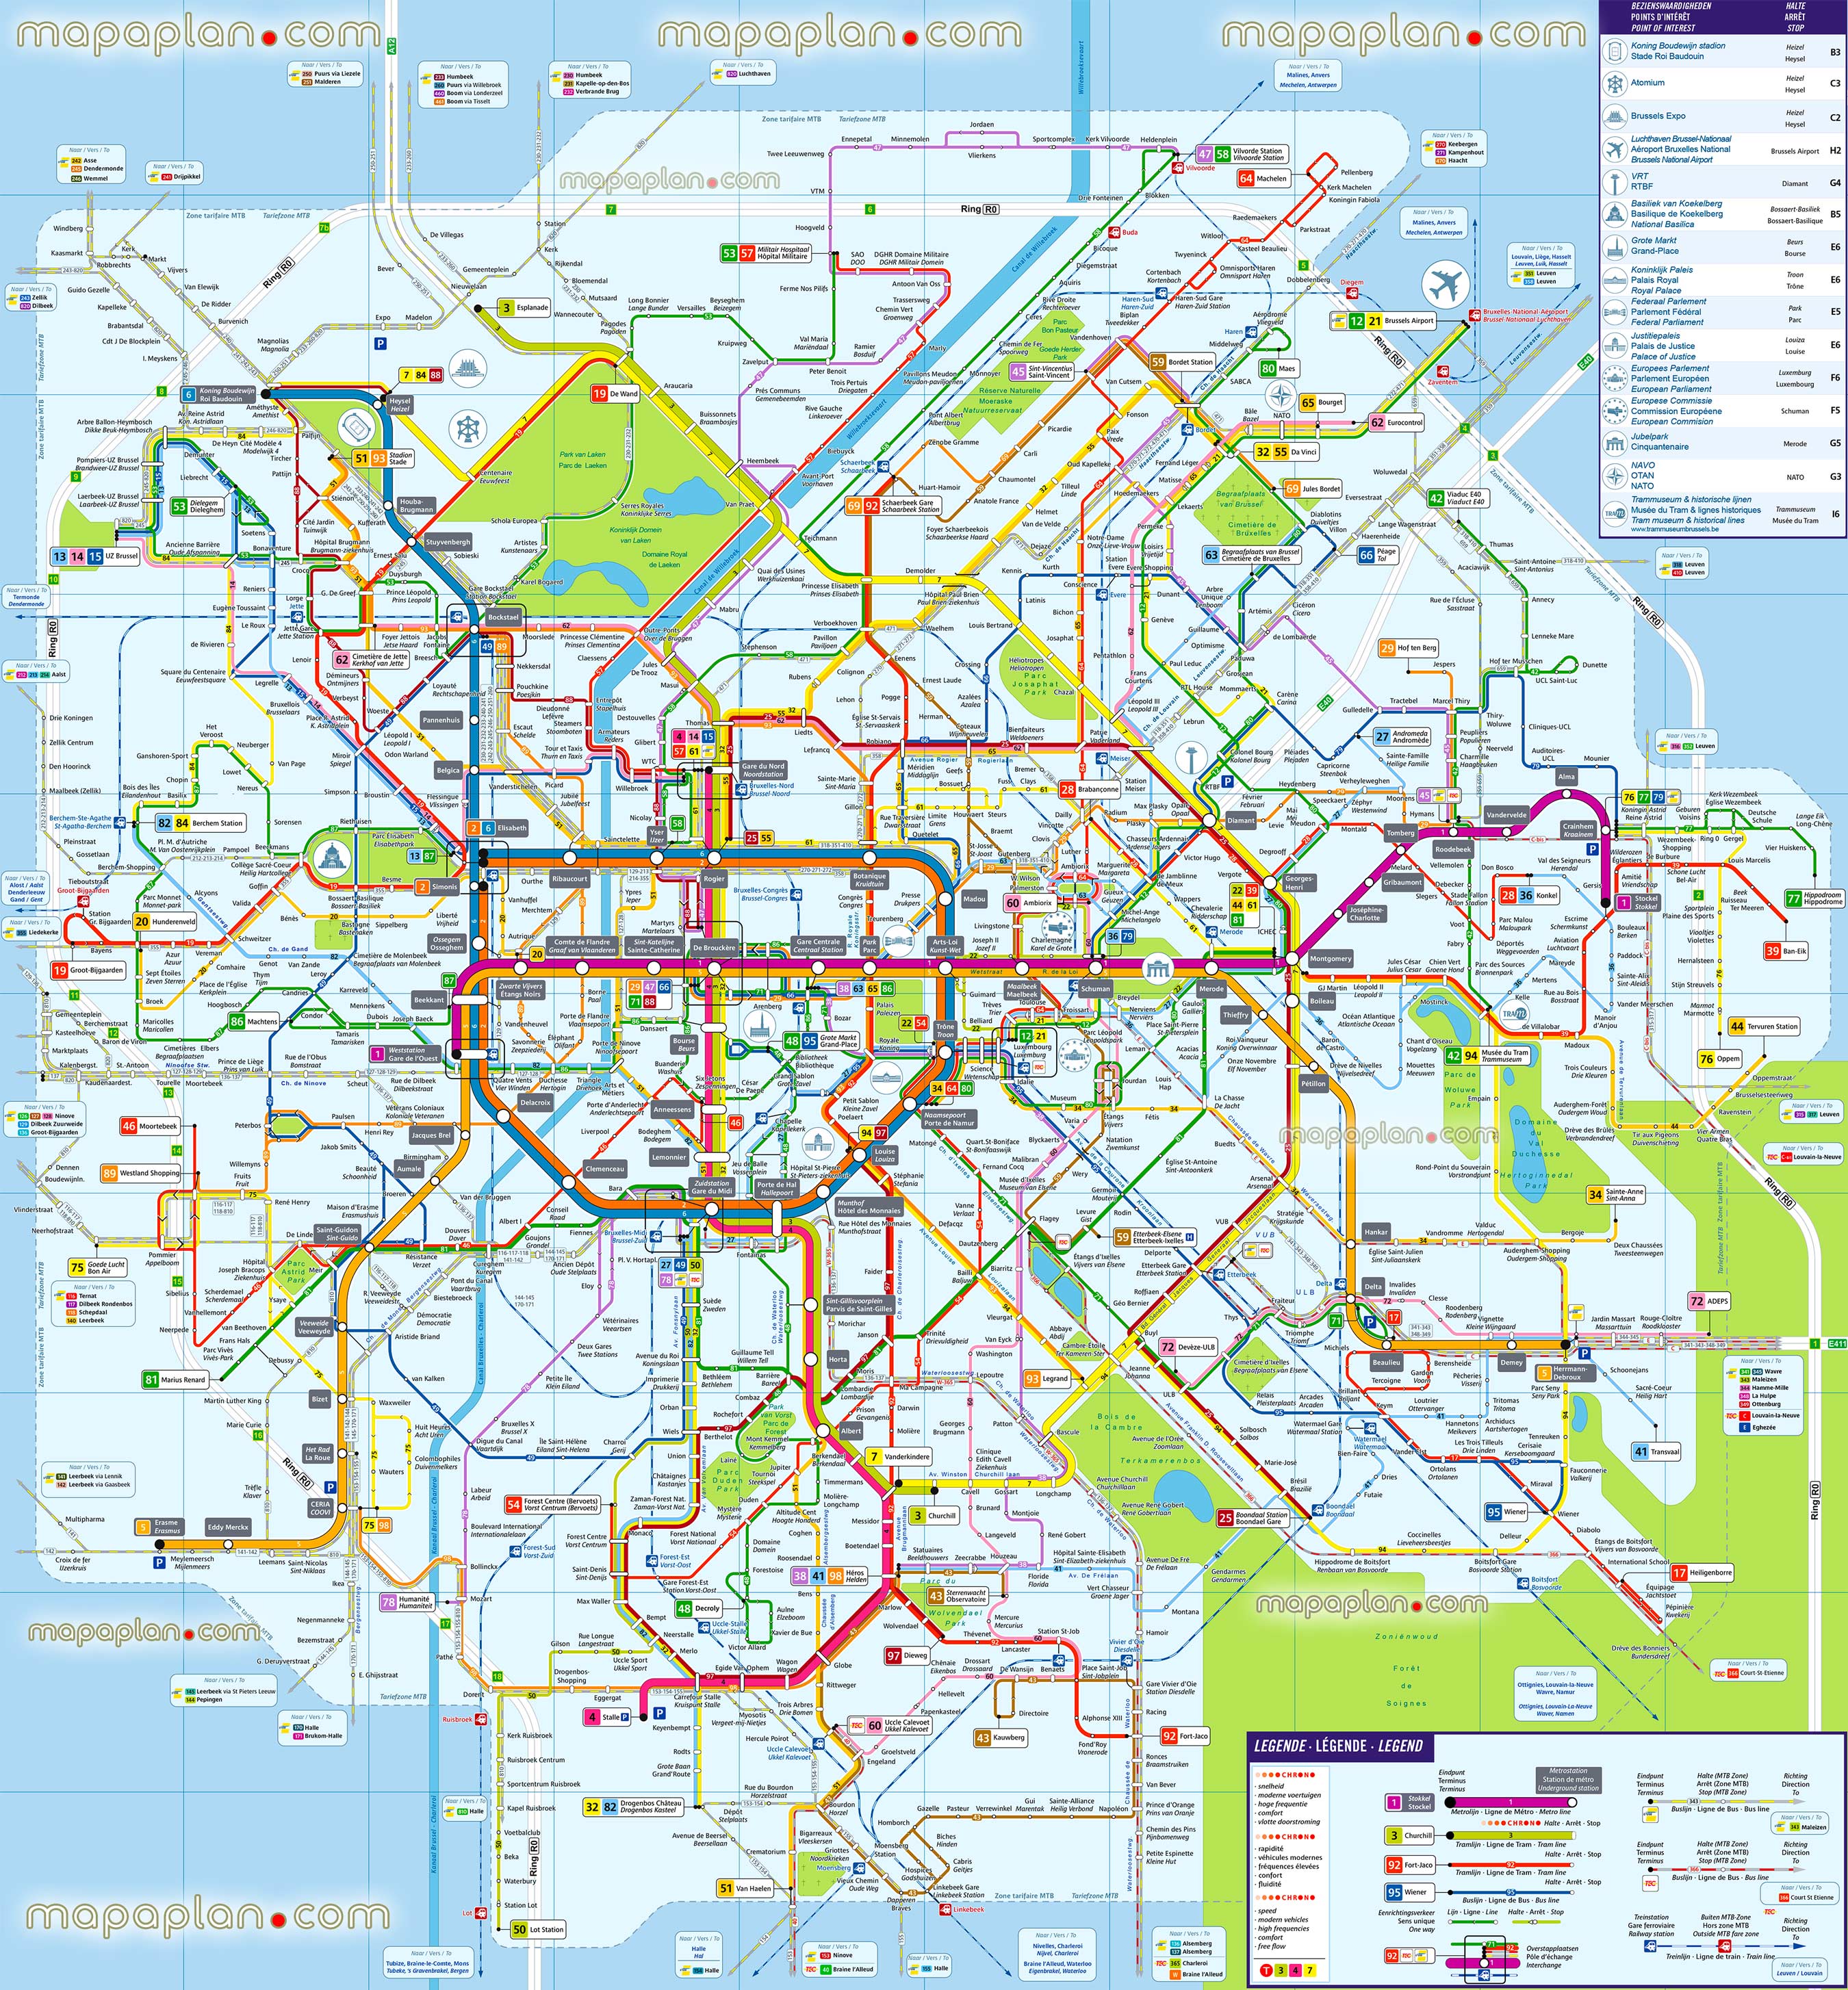 map brussels metro tram bus public transport network subway underground tube tram light rail stations zones railway routes stops updated transit diagram suburban train airports Brussels Top tourist attractions map